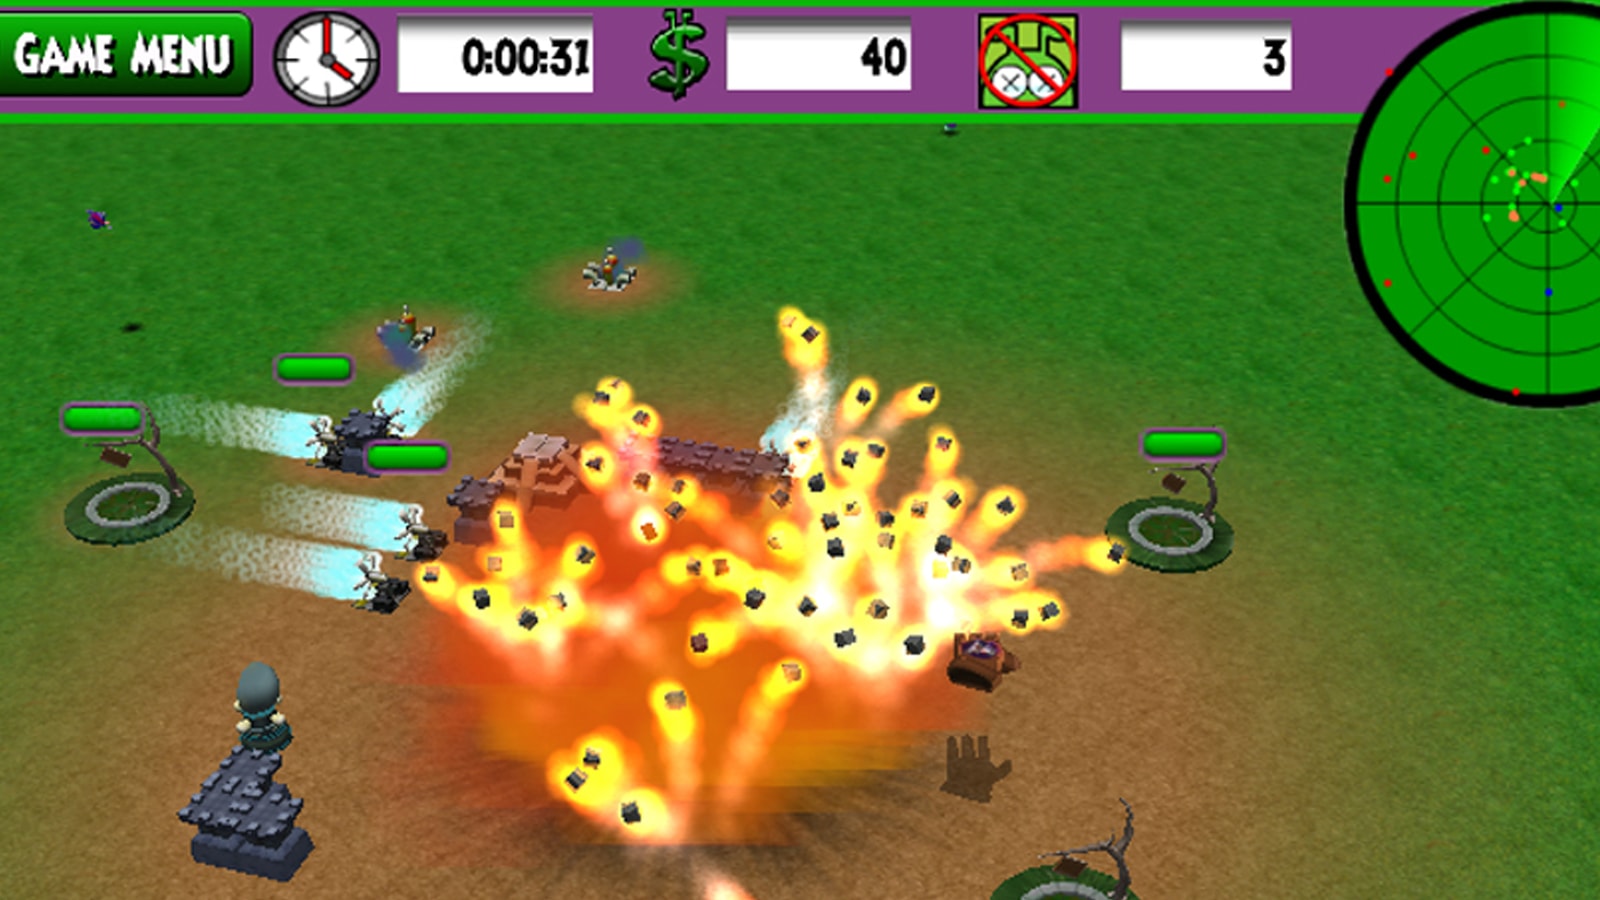 An explosion erupts in the middle of the green battlefield. 